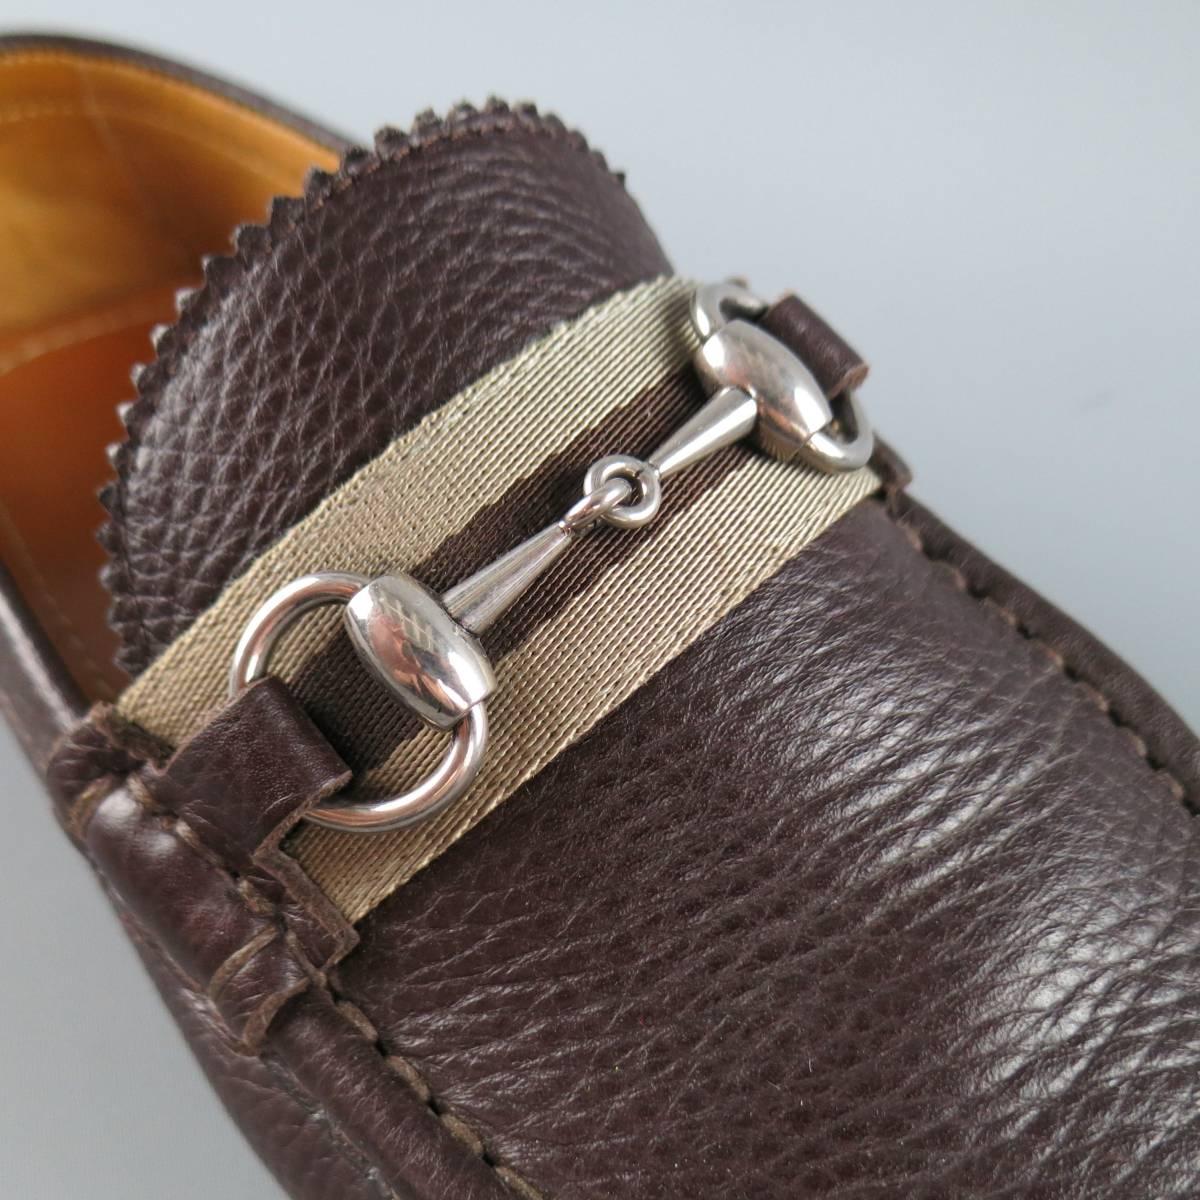 GUCCI loafers come in a rich chocolate brown pebbled leather and feature an apron toe with stripped webbing strap. silver tone horsebit detail, and driver sole. With box. Made in Italy.
 
Excellent Pre-Owned Condition.
Marked: 7.5
 
Outsole: 11 x 4